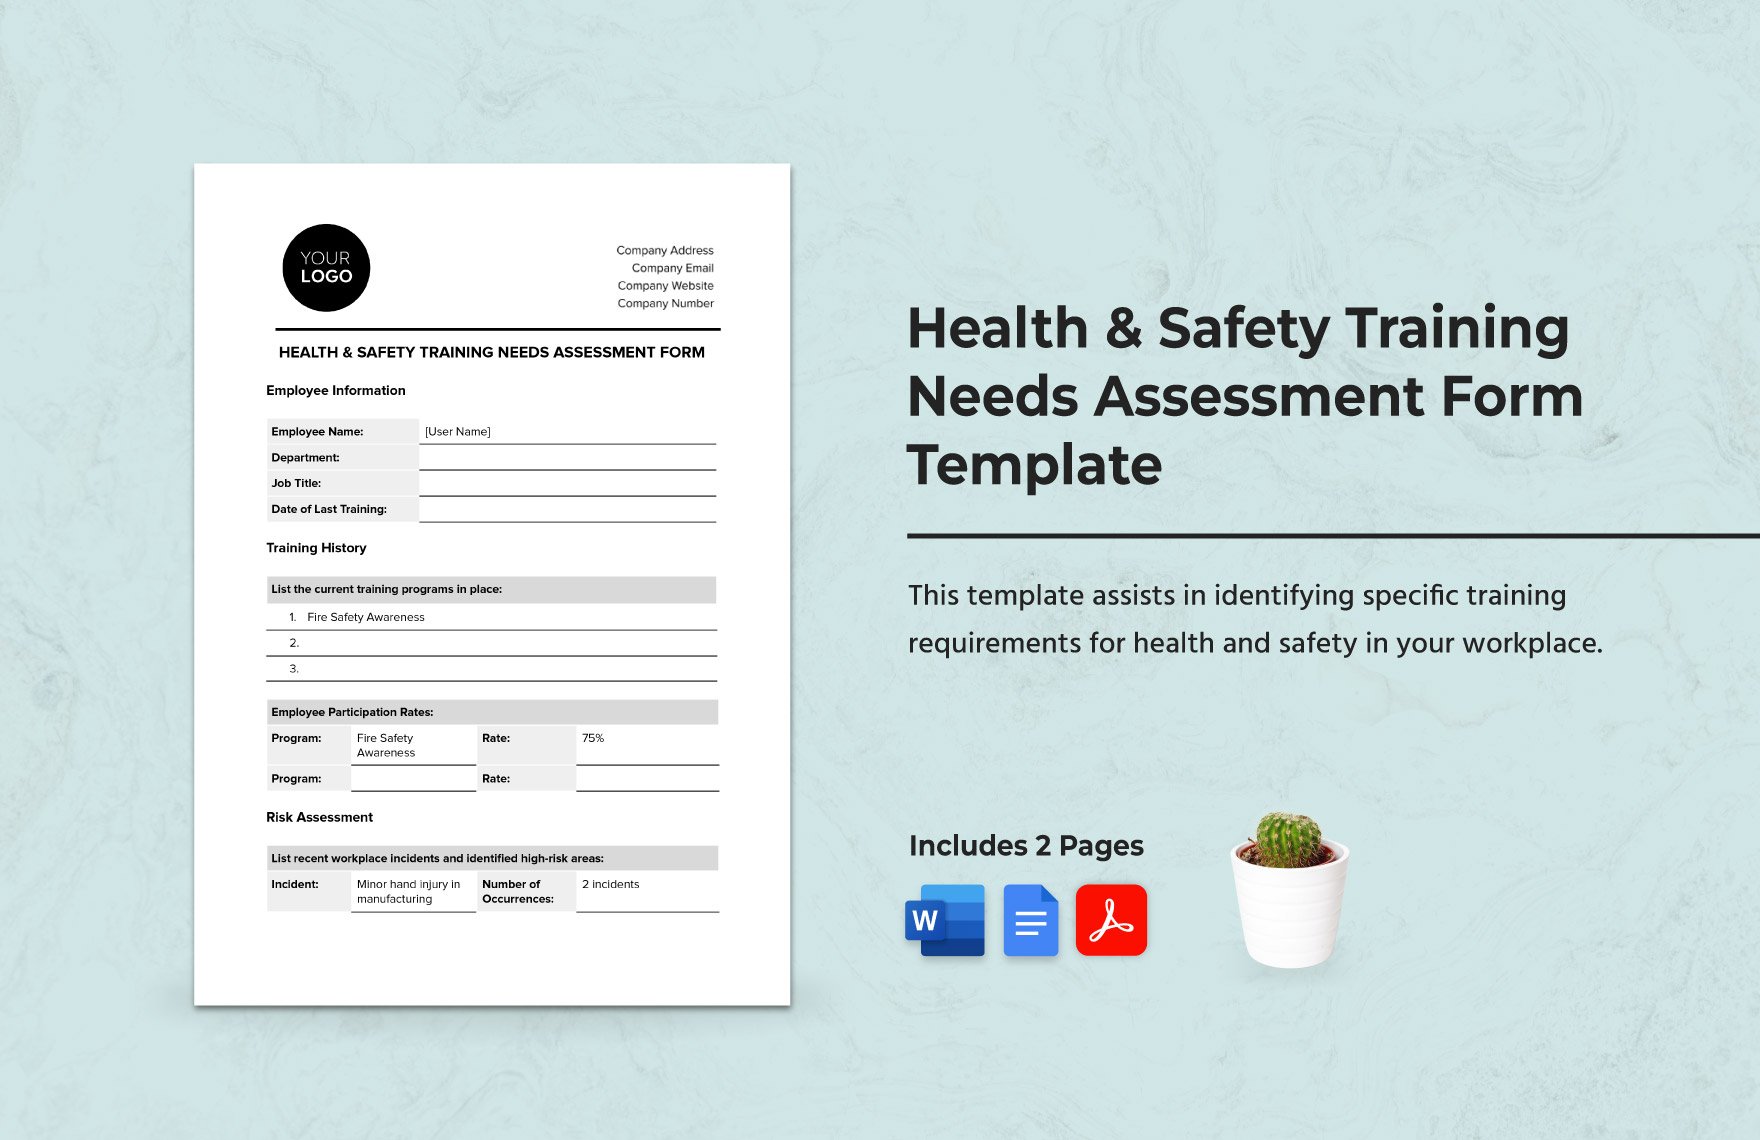 Health & Safety Training Needs Assessment Form Template in Word, Google Docs, PDF